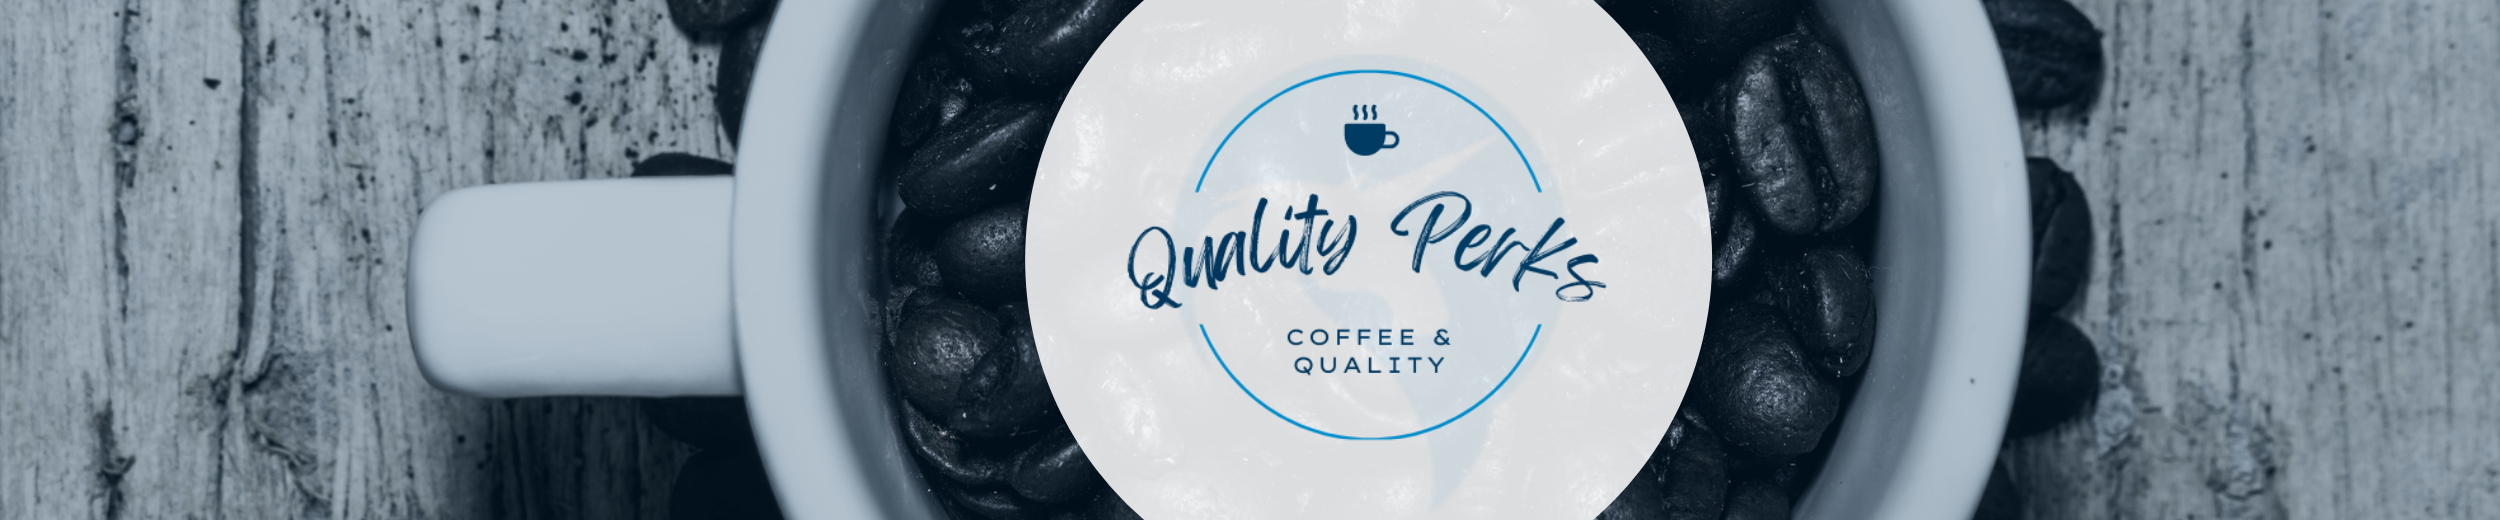 Call Center Quality and Coffee, Quality Perks